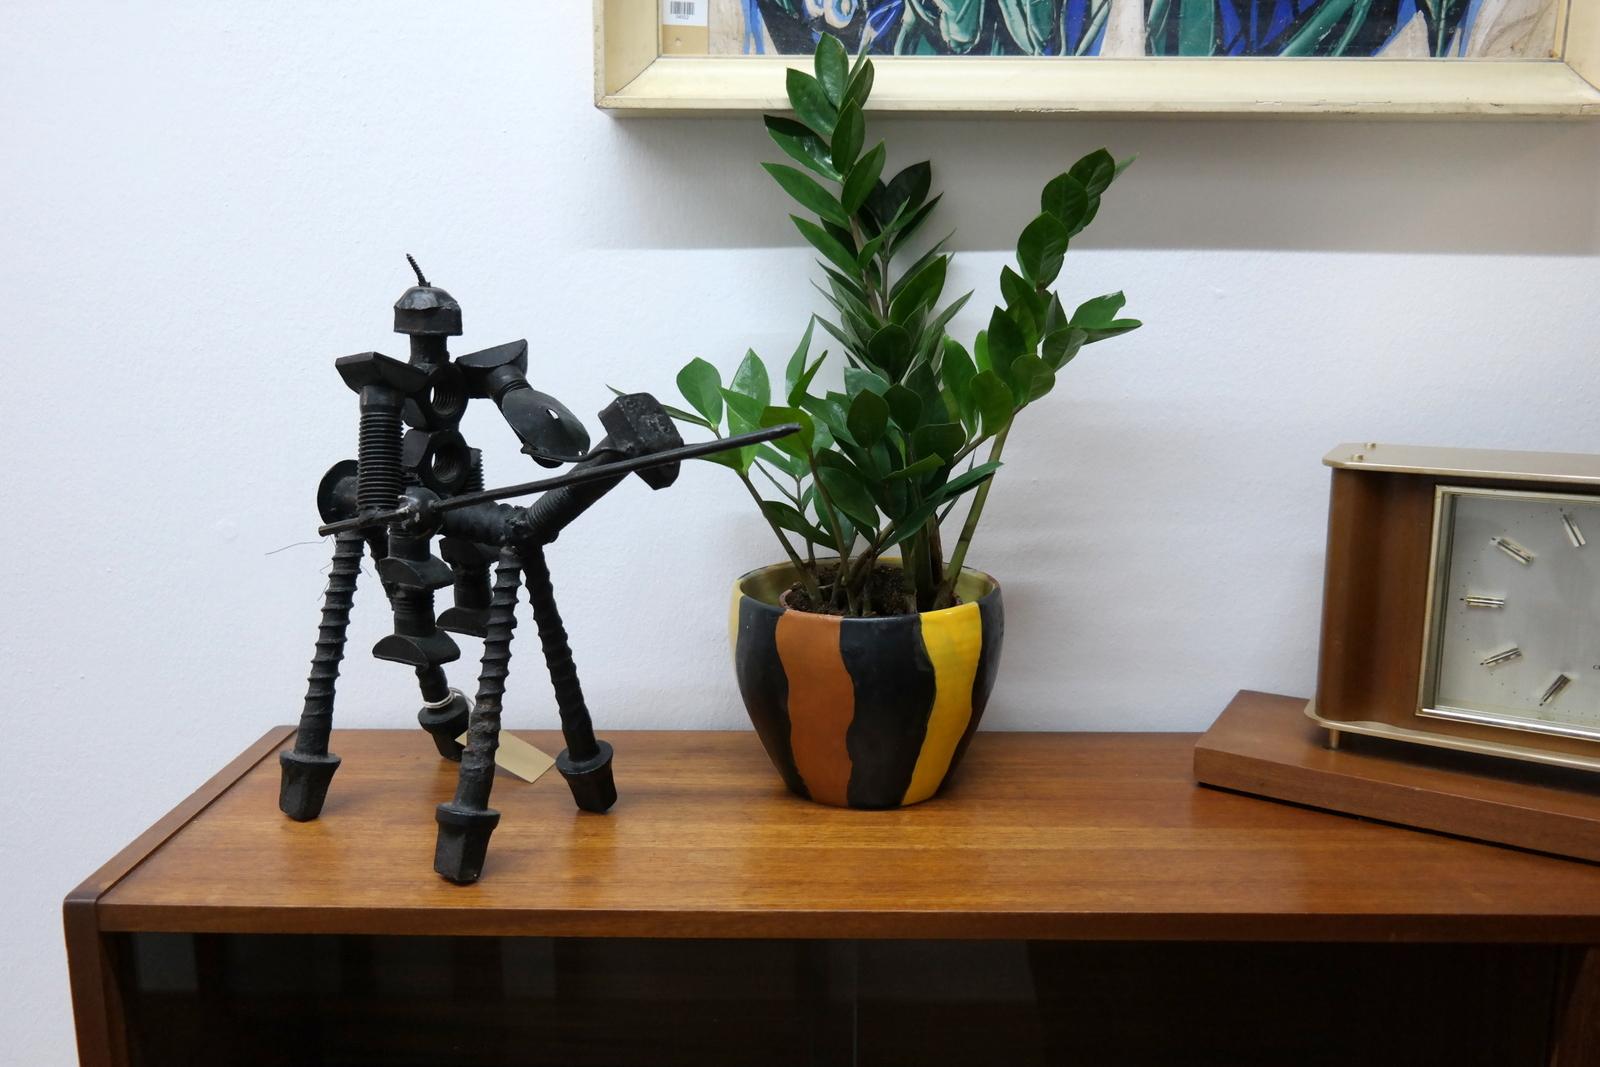 This rare piece of work is a 1970s handmade nut and bolt steel sculpture of Don Quijote.